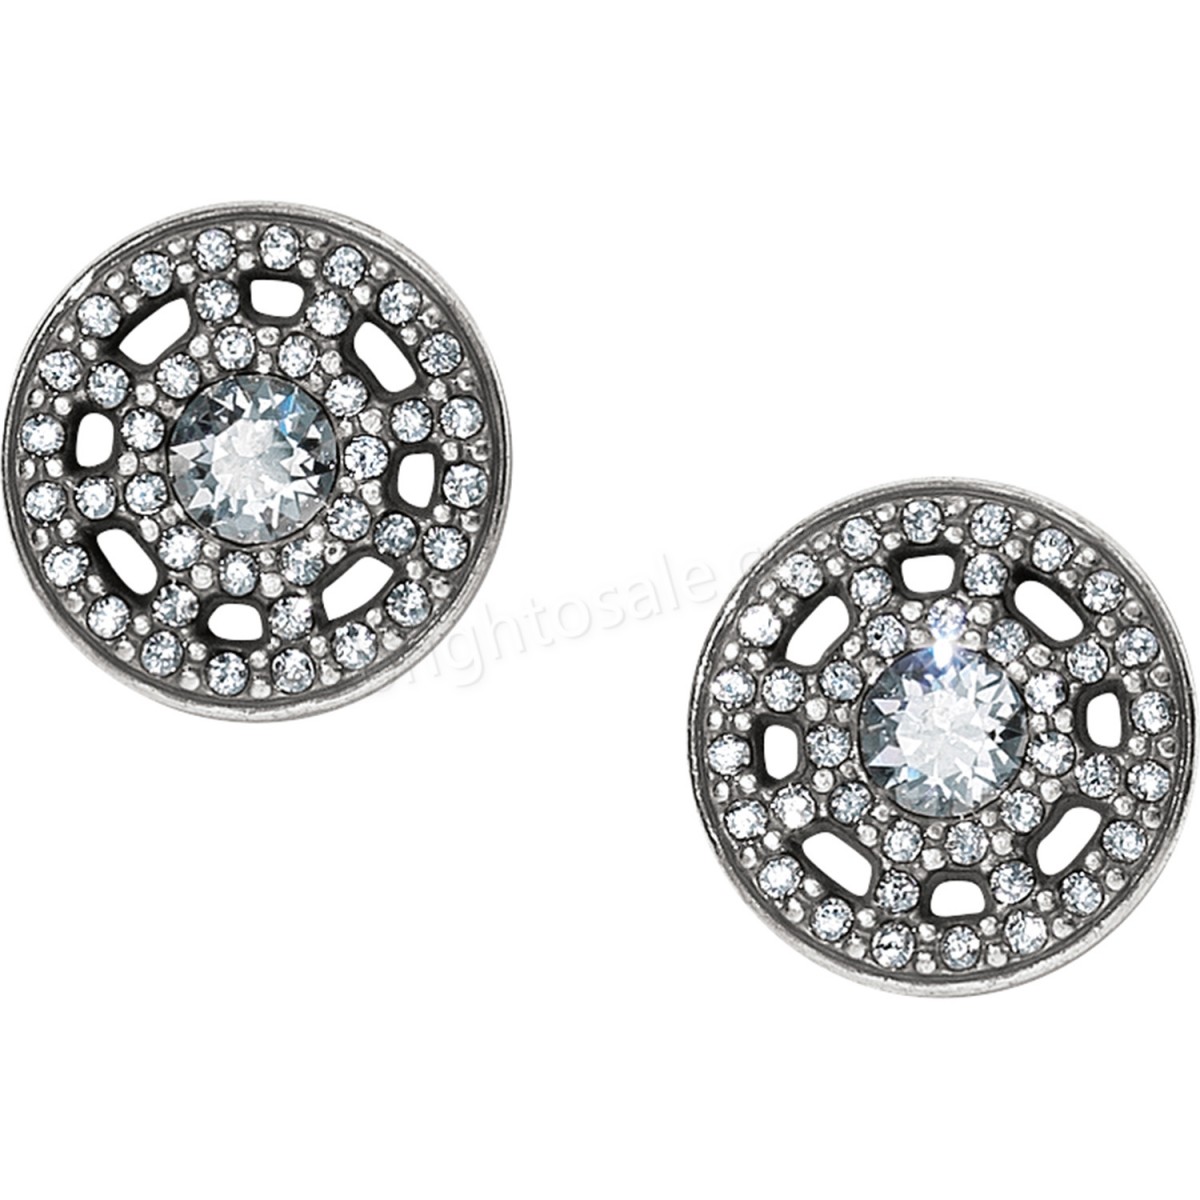 Brighton Collectibles & Online Discount Illumina Post Earrings - -0